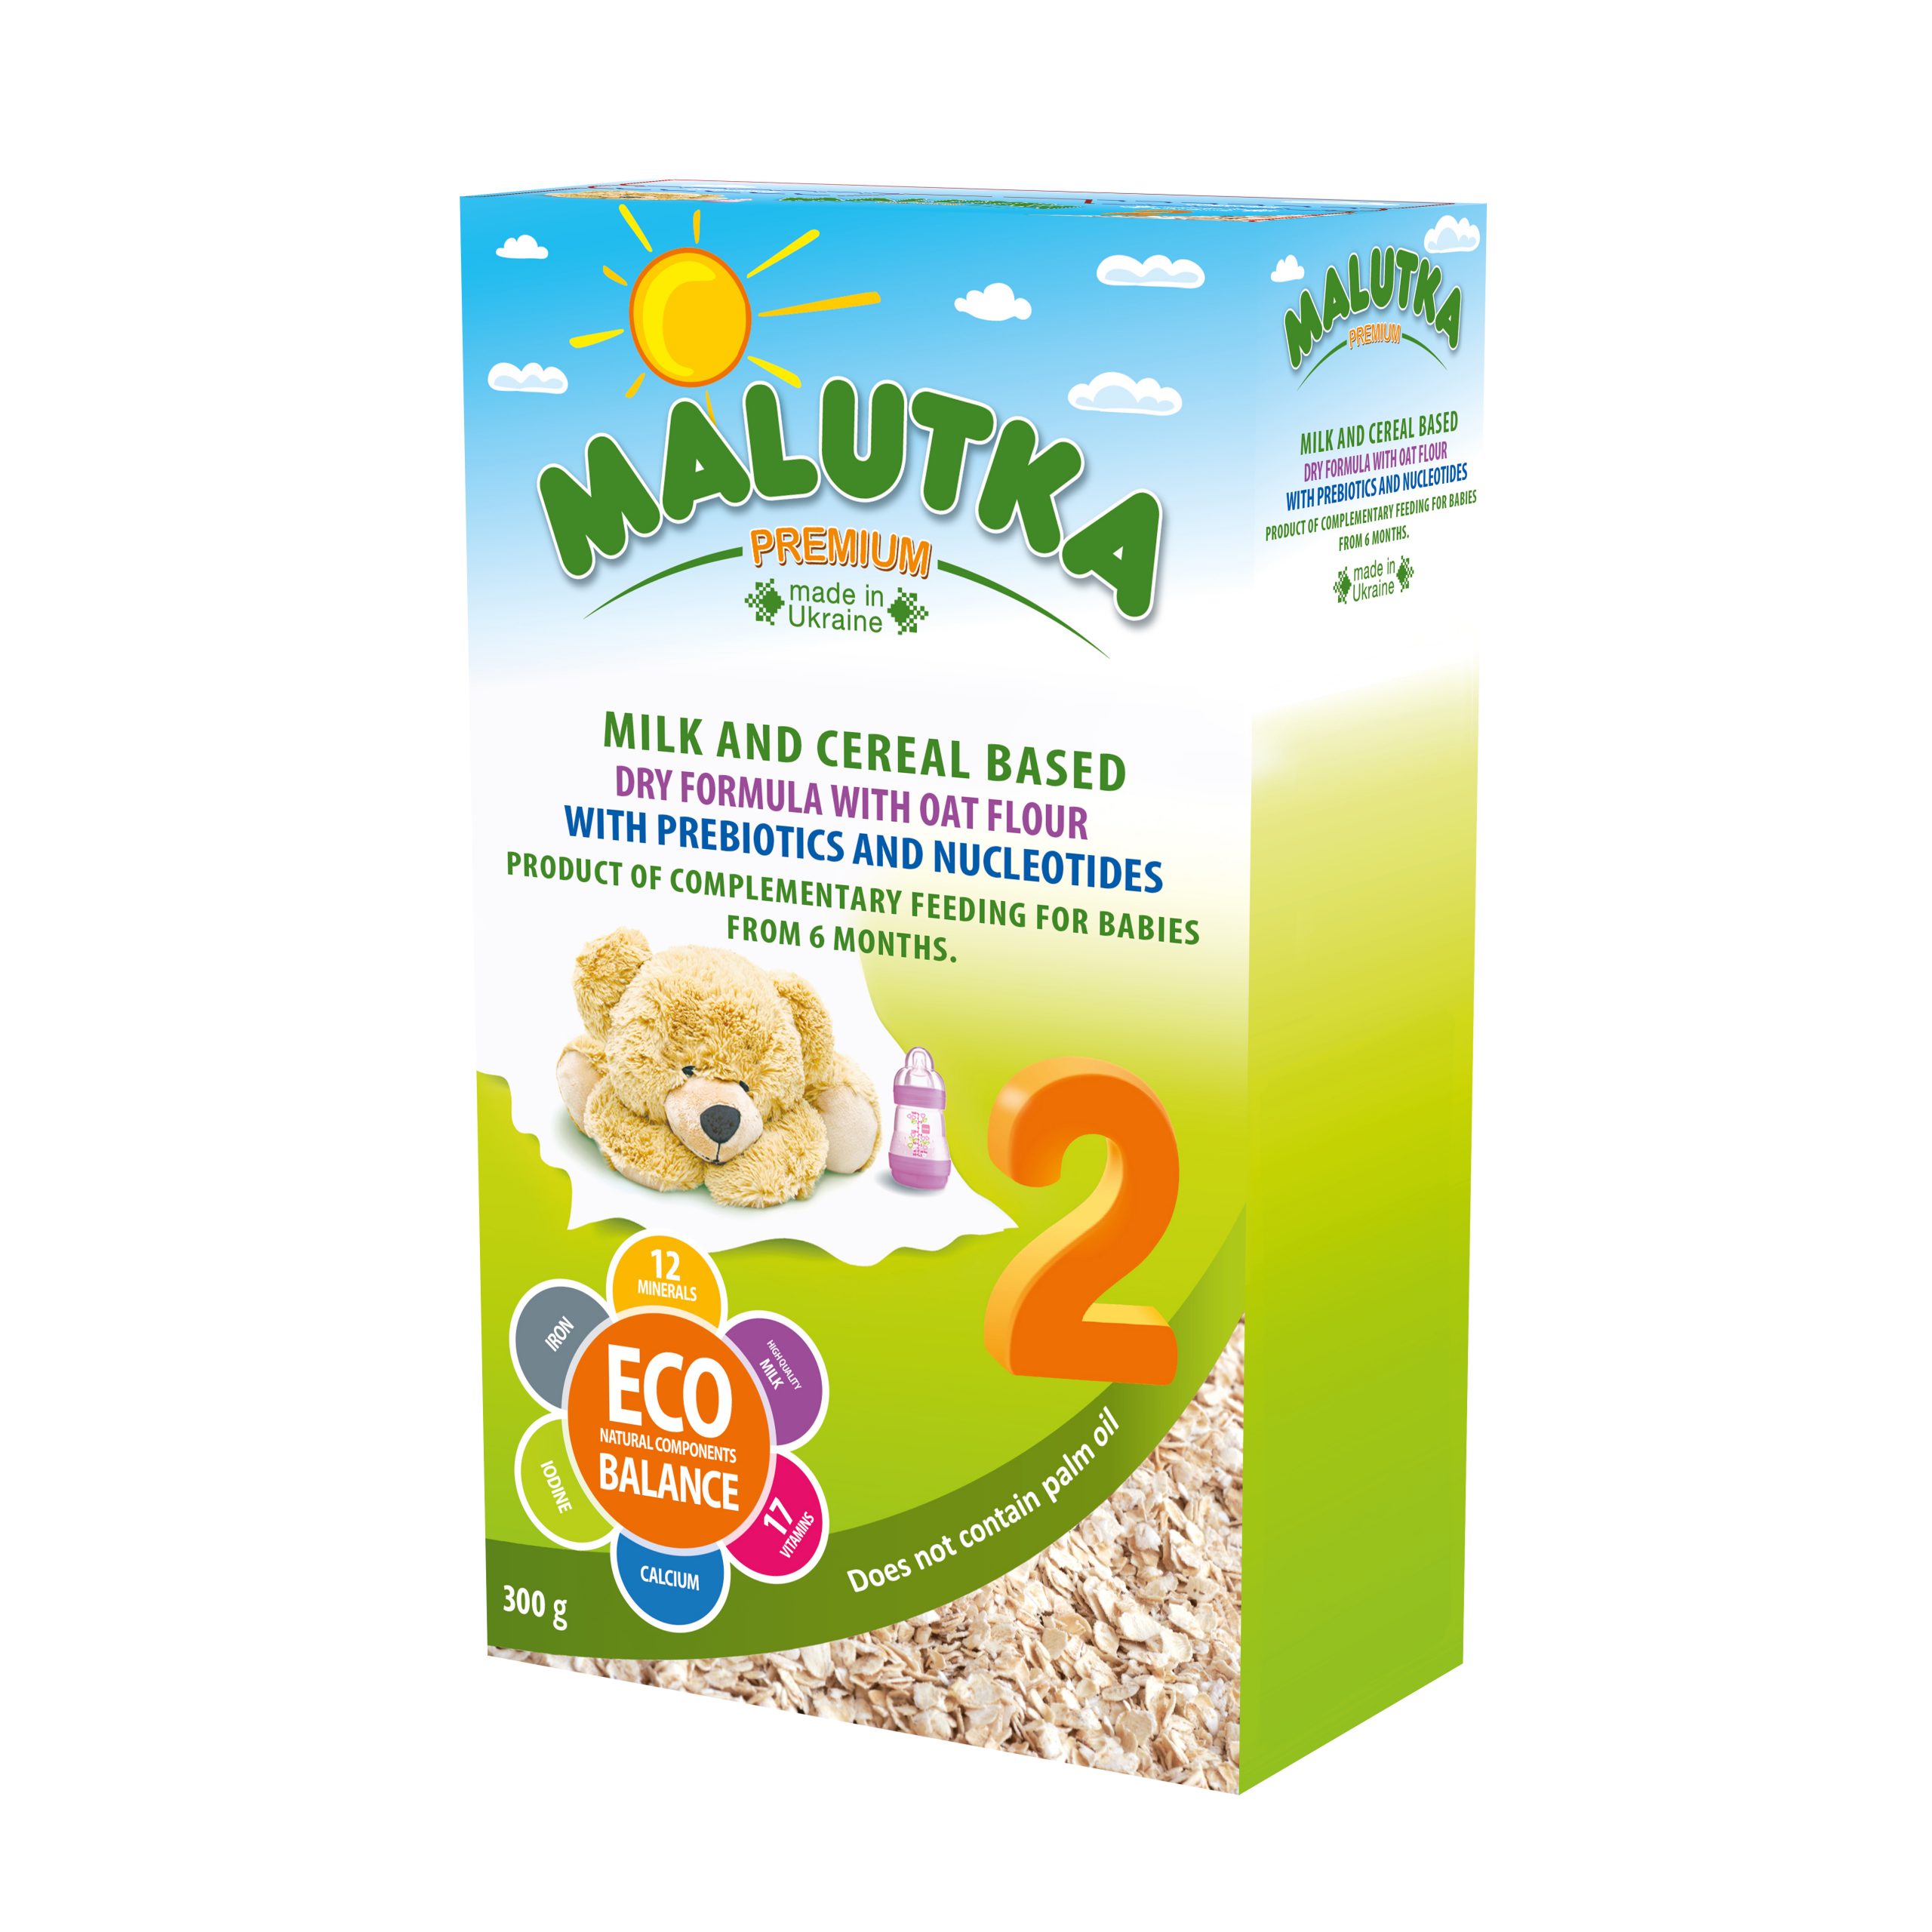 Milk and cereal based infant formula with oat flour with prebiotics and nucleotides. Product of complementary feeding for babies from 6 months